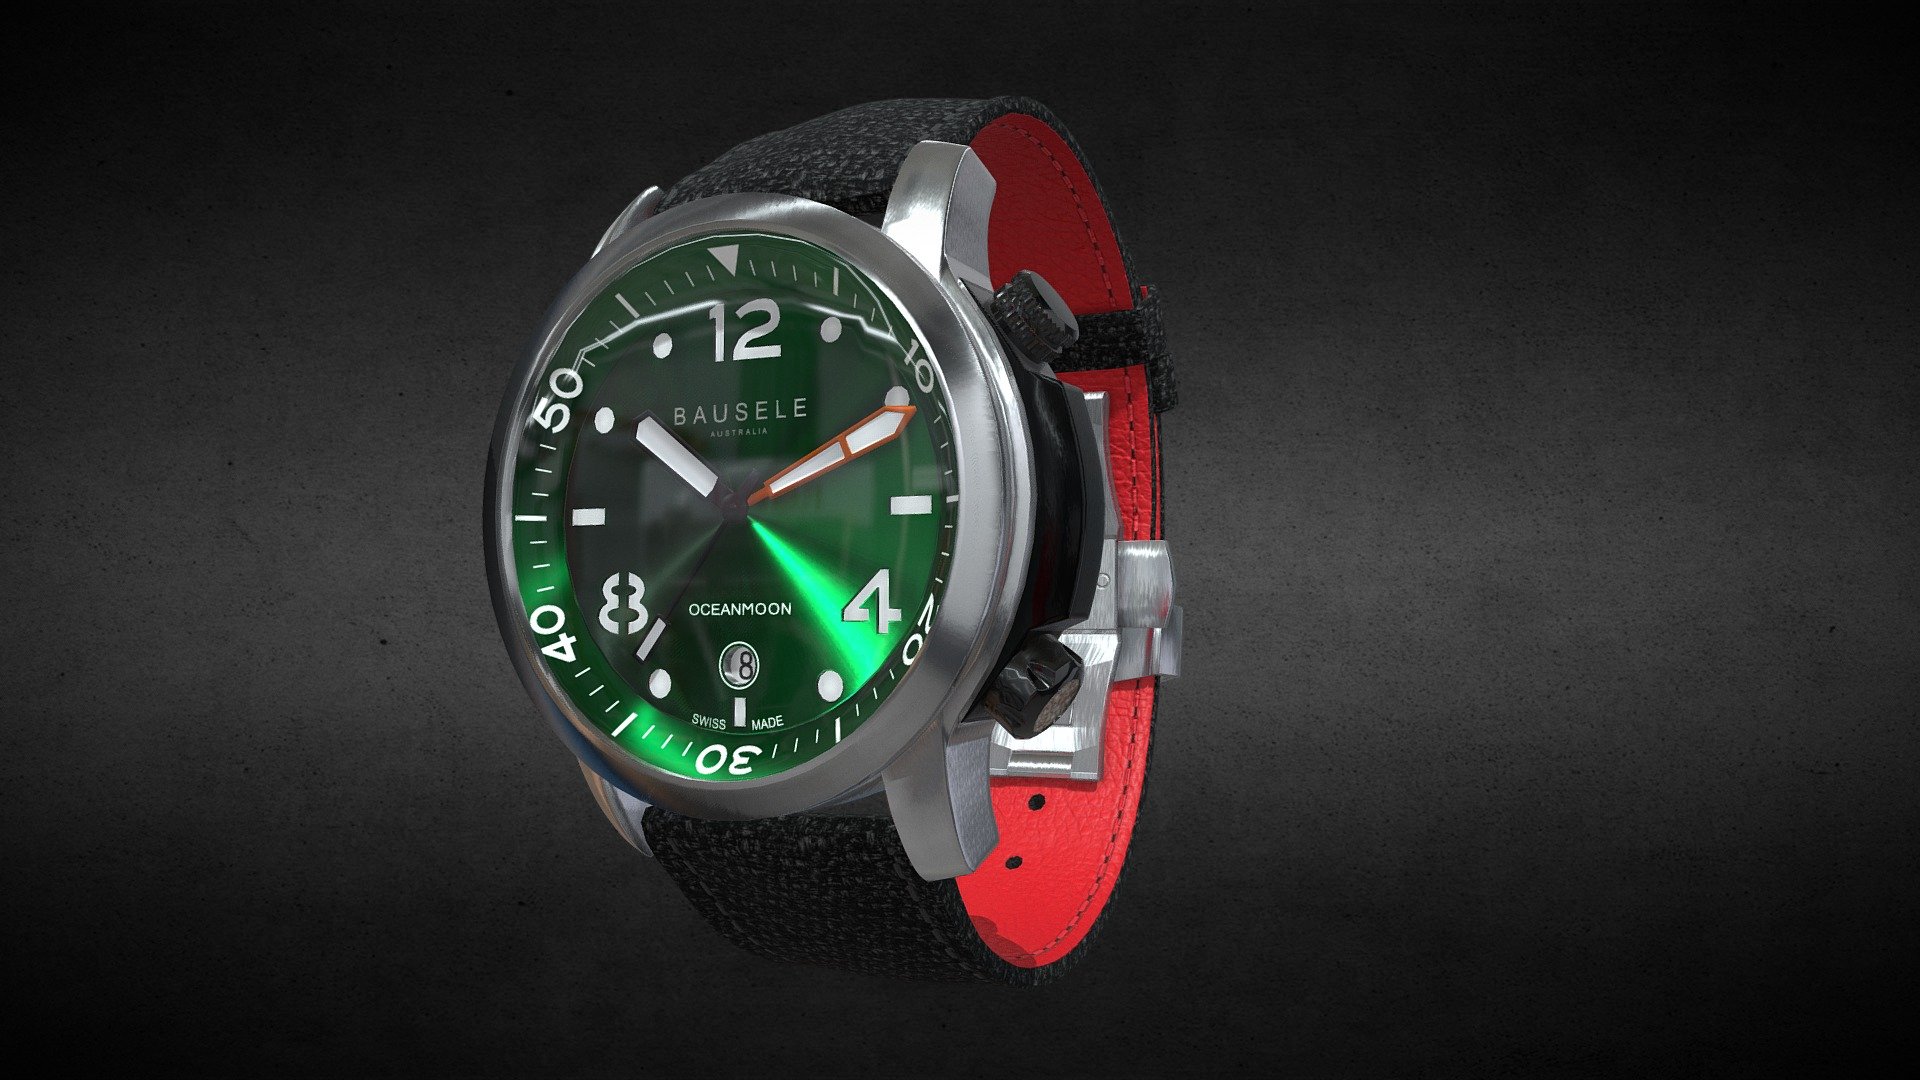 Awesome stainless steel Bausele Green Oceanmoon Watch․
Use for Unreal Engine 4 and Unity3D. Try in augmented reality in the AR-Watches app. 
Links to the app: Android, iOS

Currently available for download in FBX format.

3D model developed by AR-Watches

Disclaimer: We do not own the design of the watch, we only made the 3D model 3d model